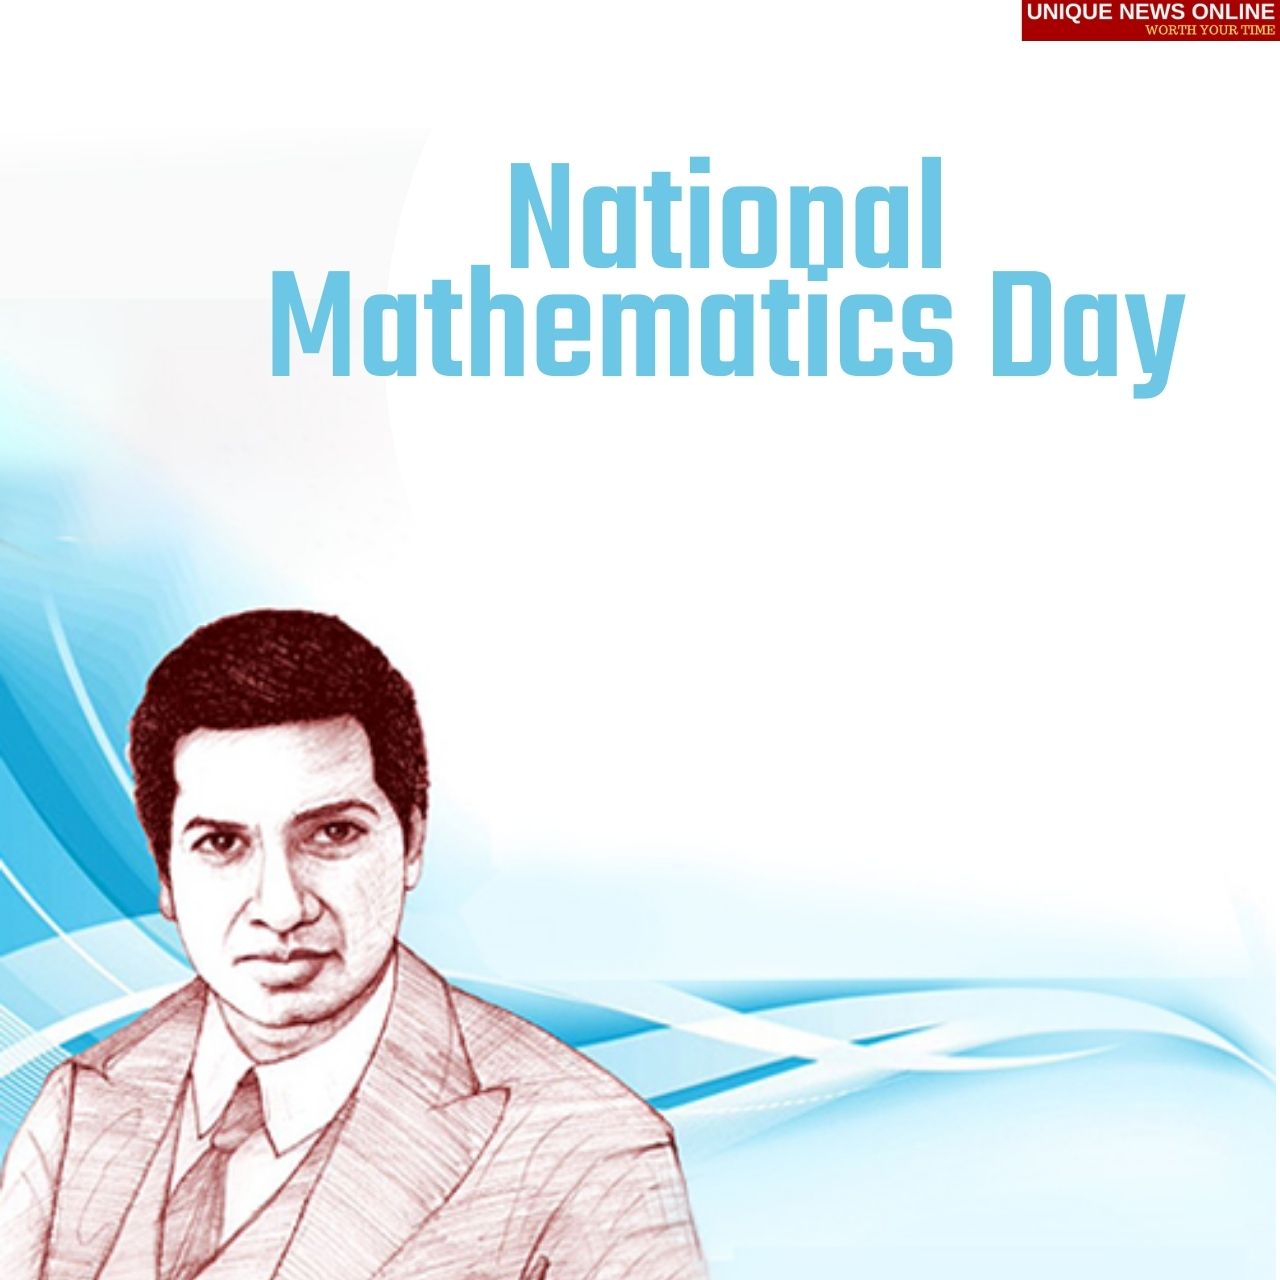 National Mathematics Day 2021 Date, Theme, History, Significance, Activities, Facts, and More